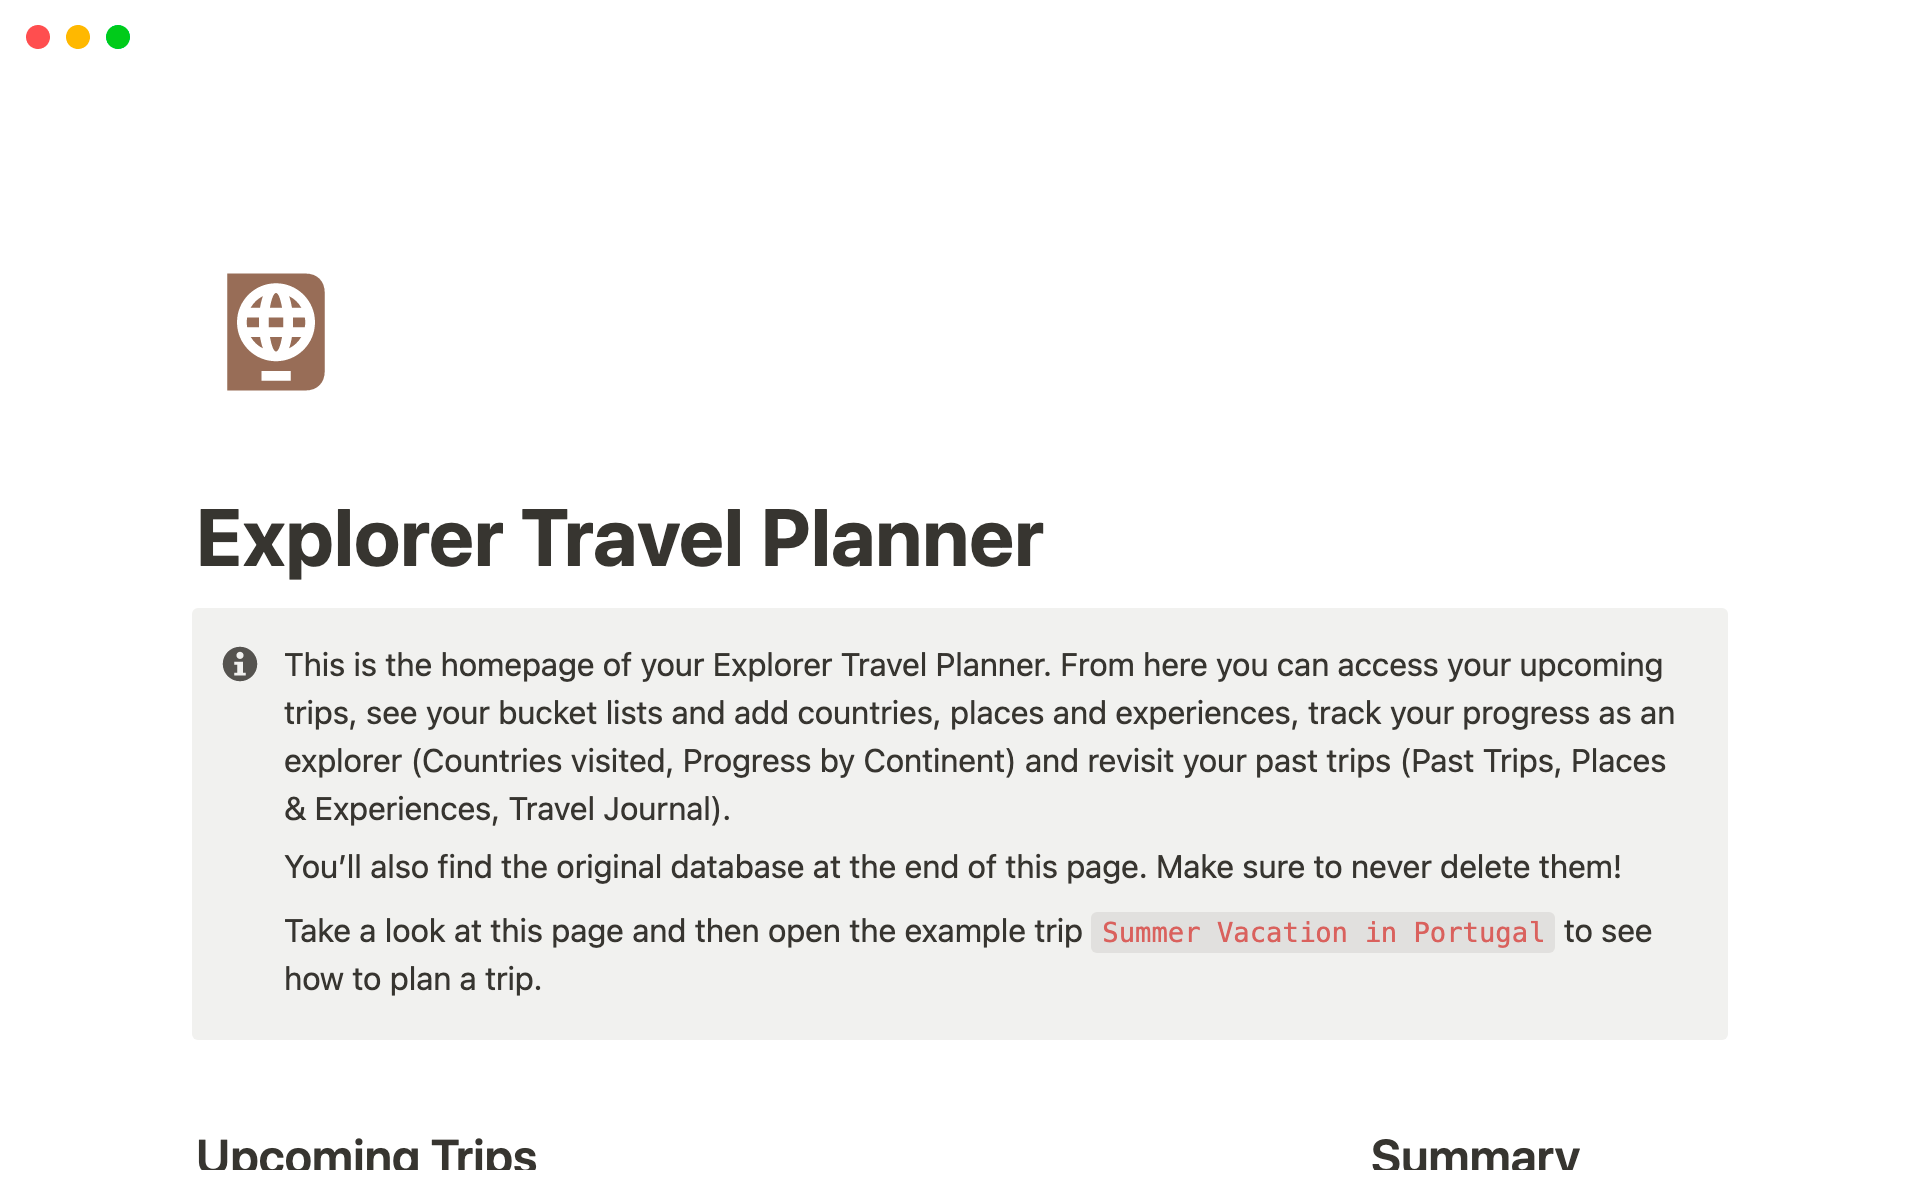 Plan your next trips with the Explorer Travel Planner and make your travel dreams a reality